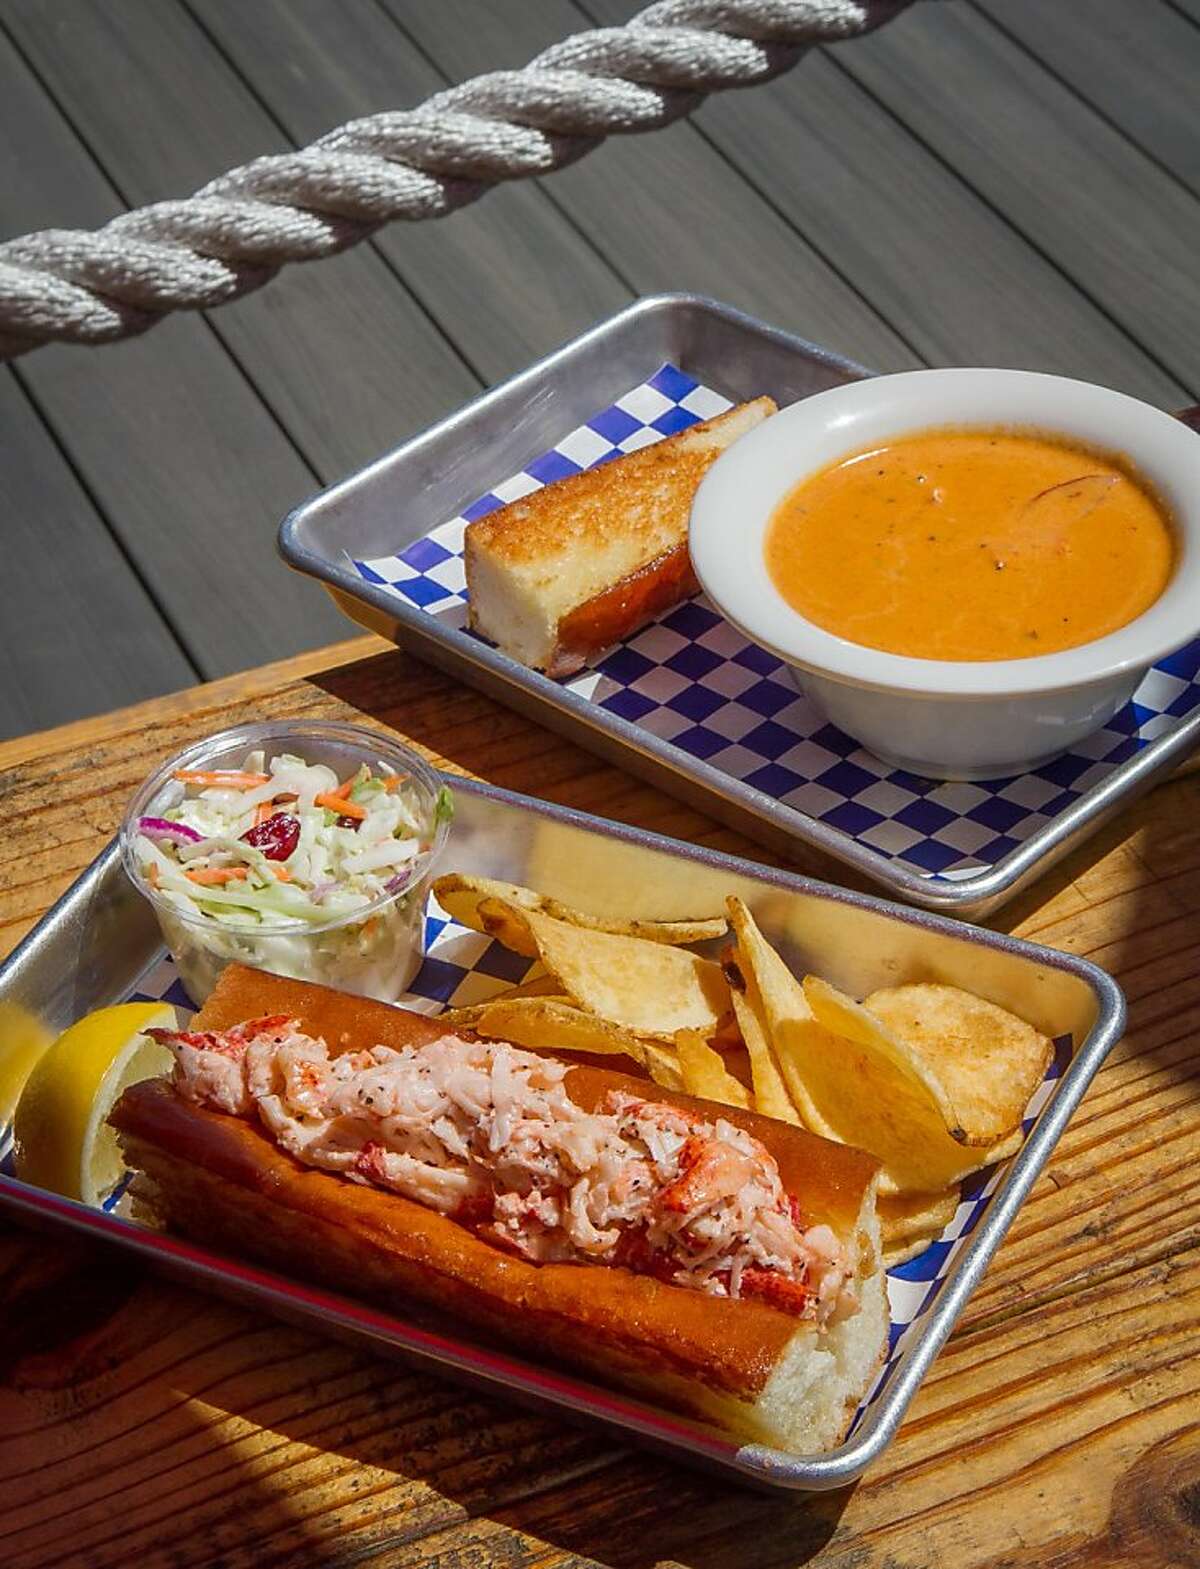 The Lobster roll with a bowl of Clam Chowder at the New England Lobster Company in Burlingame, Calif., is seen on Tuesday, April 30th, 2012.